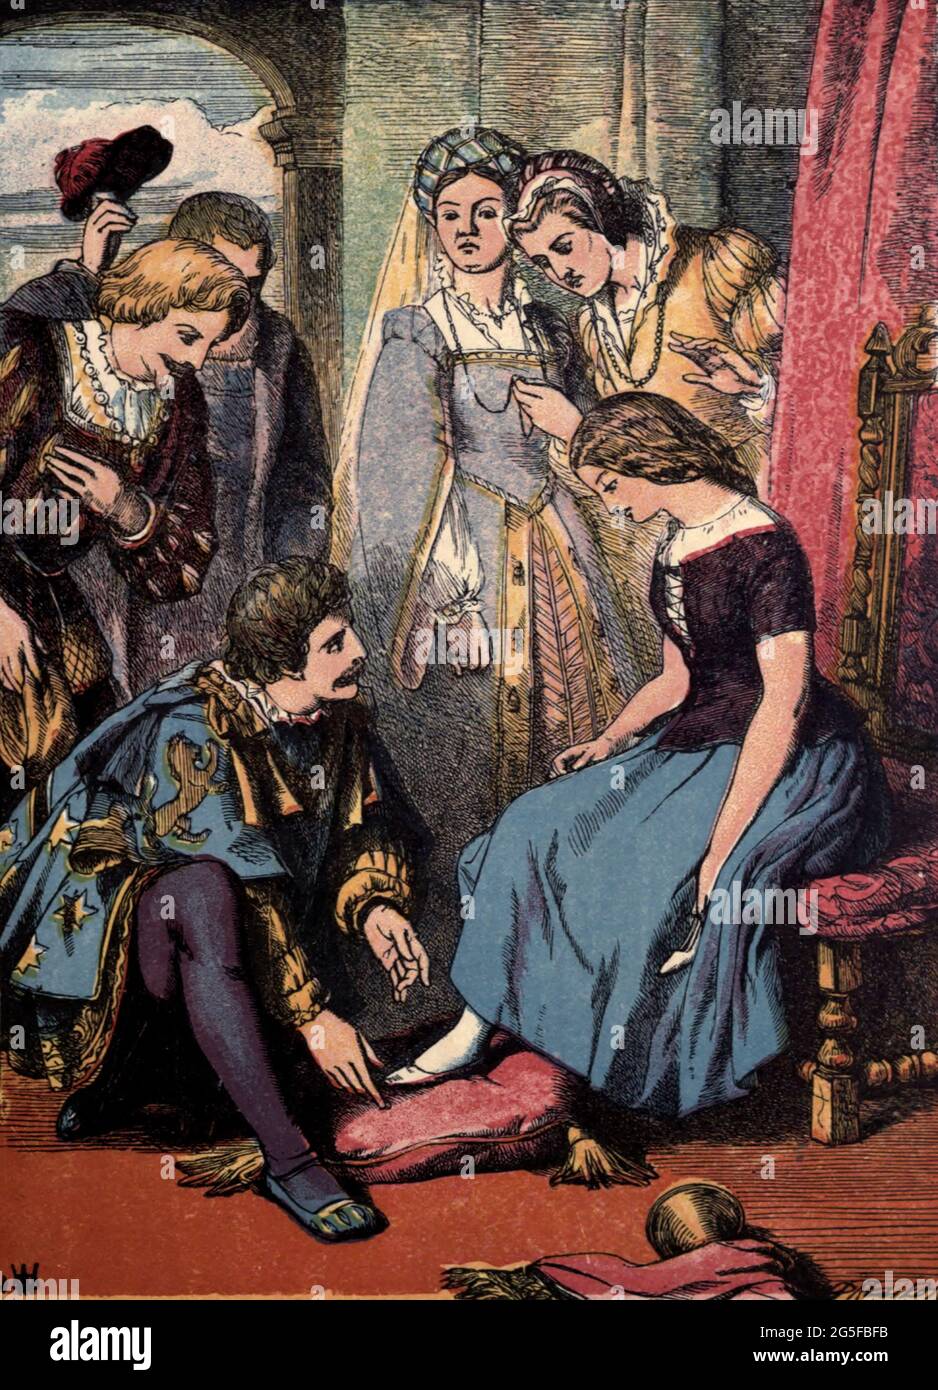 Cinderella or The Little Glass Slipper by Edward Dalziel and George Dalziel Published in London and New York by George Routledge and Sons between 1865 - 1889 Stock Photo